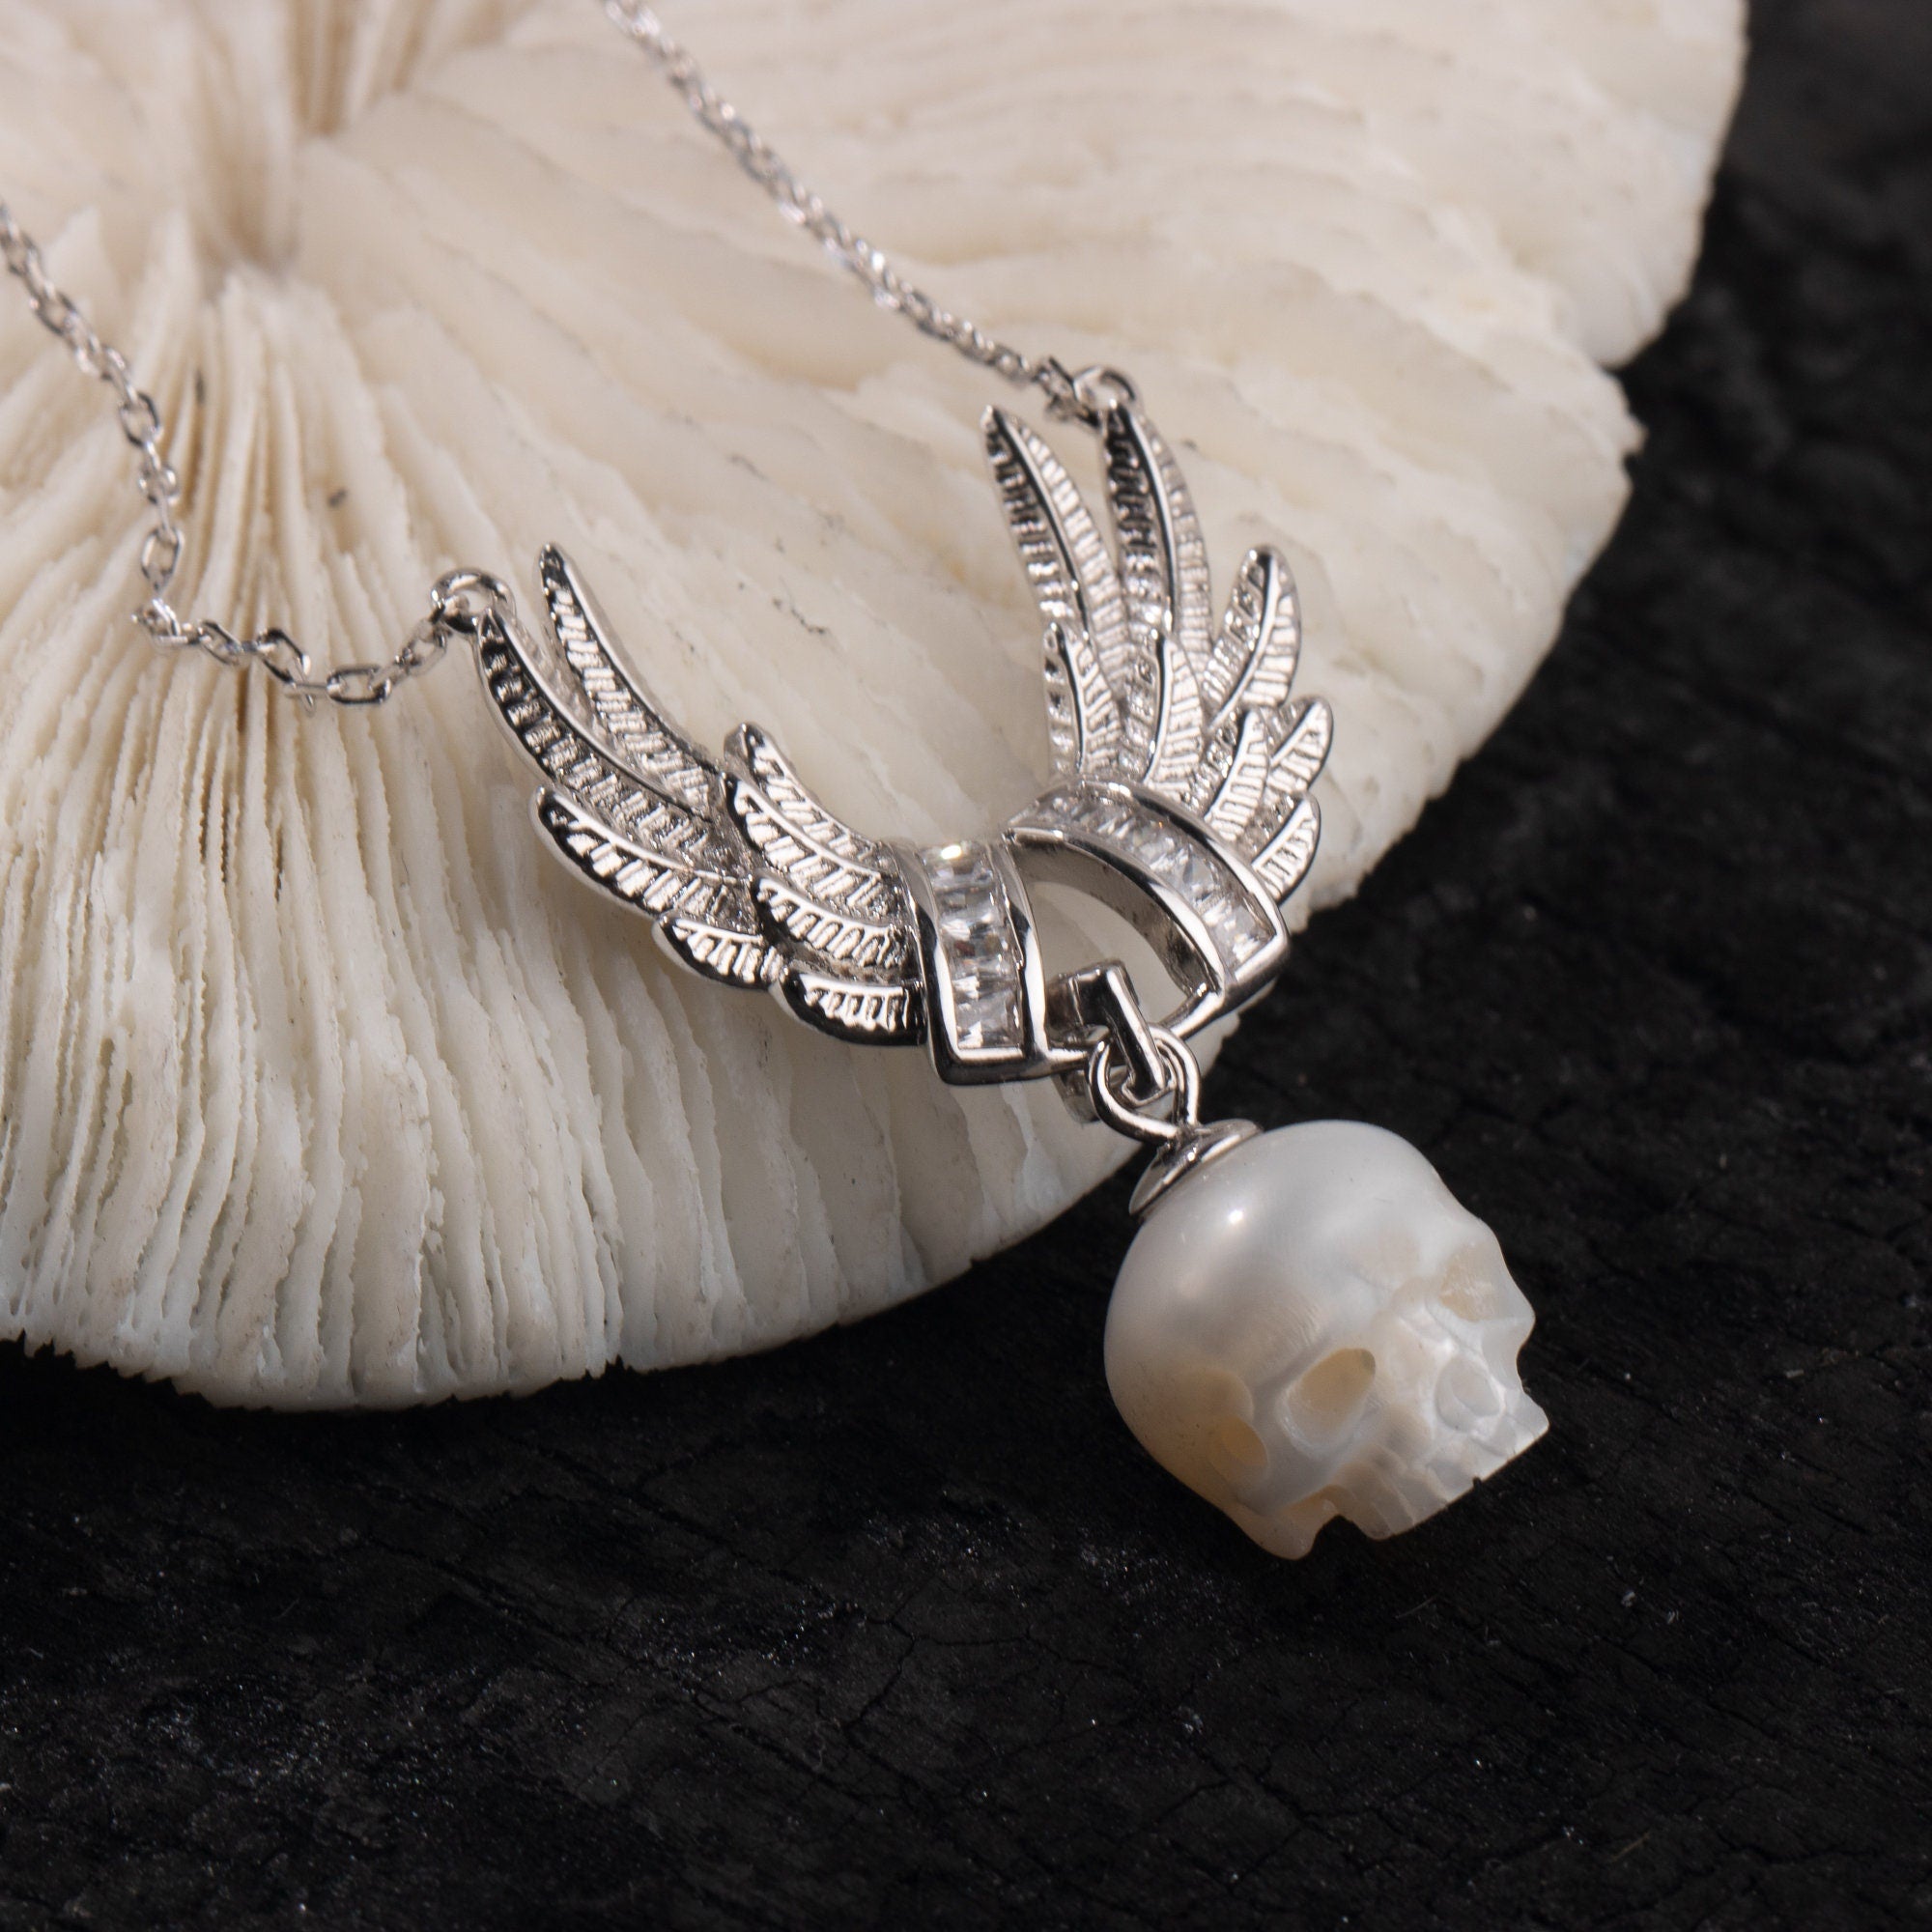 Eagle Wing Necklace skull carved pearl S925 silver necklace